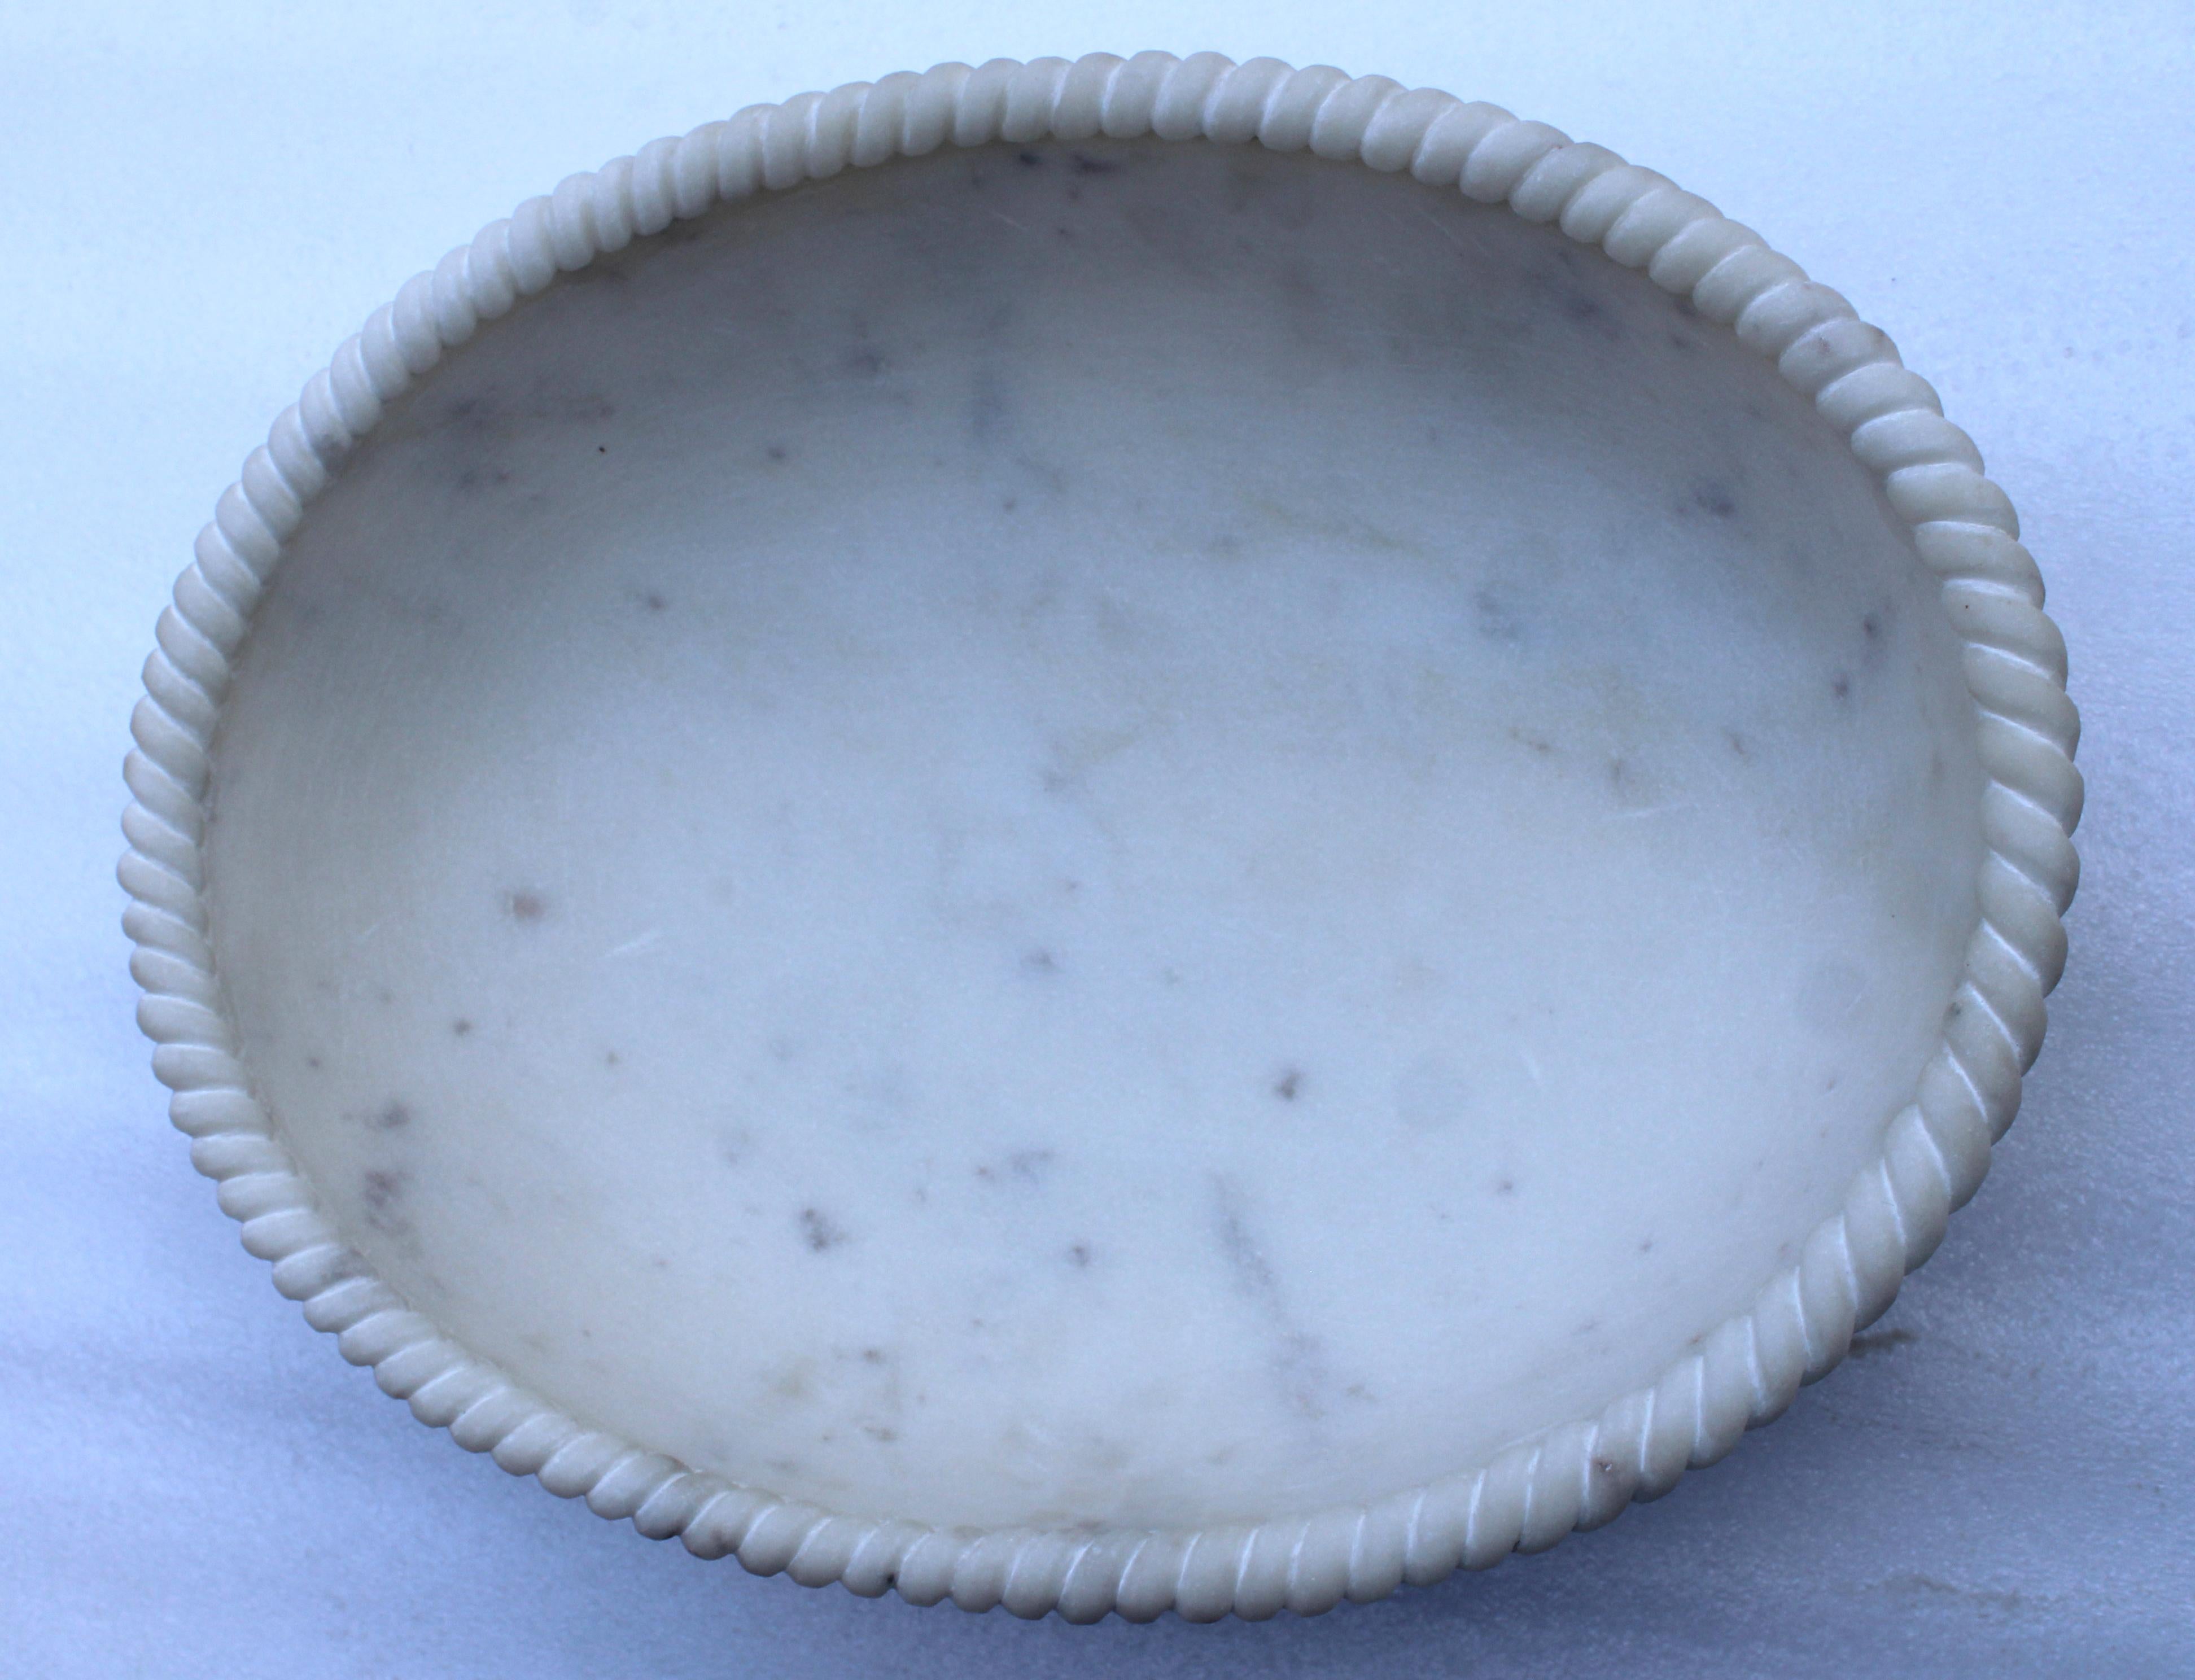 Sculpted out of a single block of marble with a delicately carved rope edge, perfect for a potpourri, a fruit bowl or just a key catch.


Oval Rope Bowl
Size- 14” x 11” x 4” H
Materials - Marble, Hand-Carved


Buyer Cancellation-
The cancellation